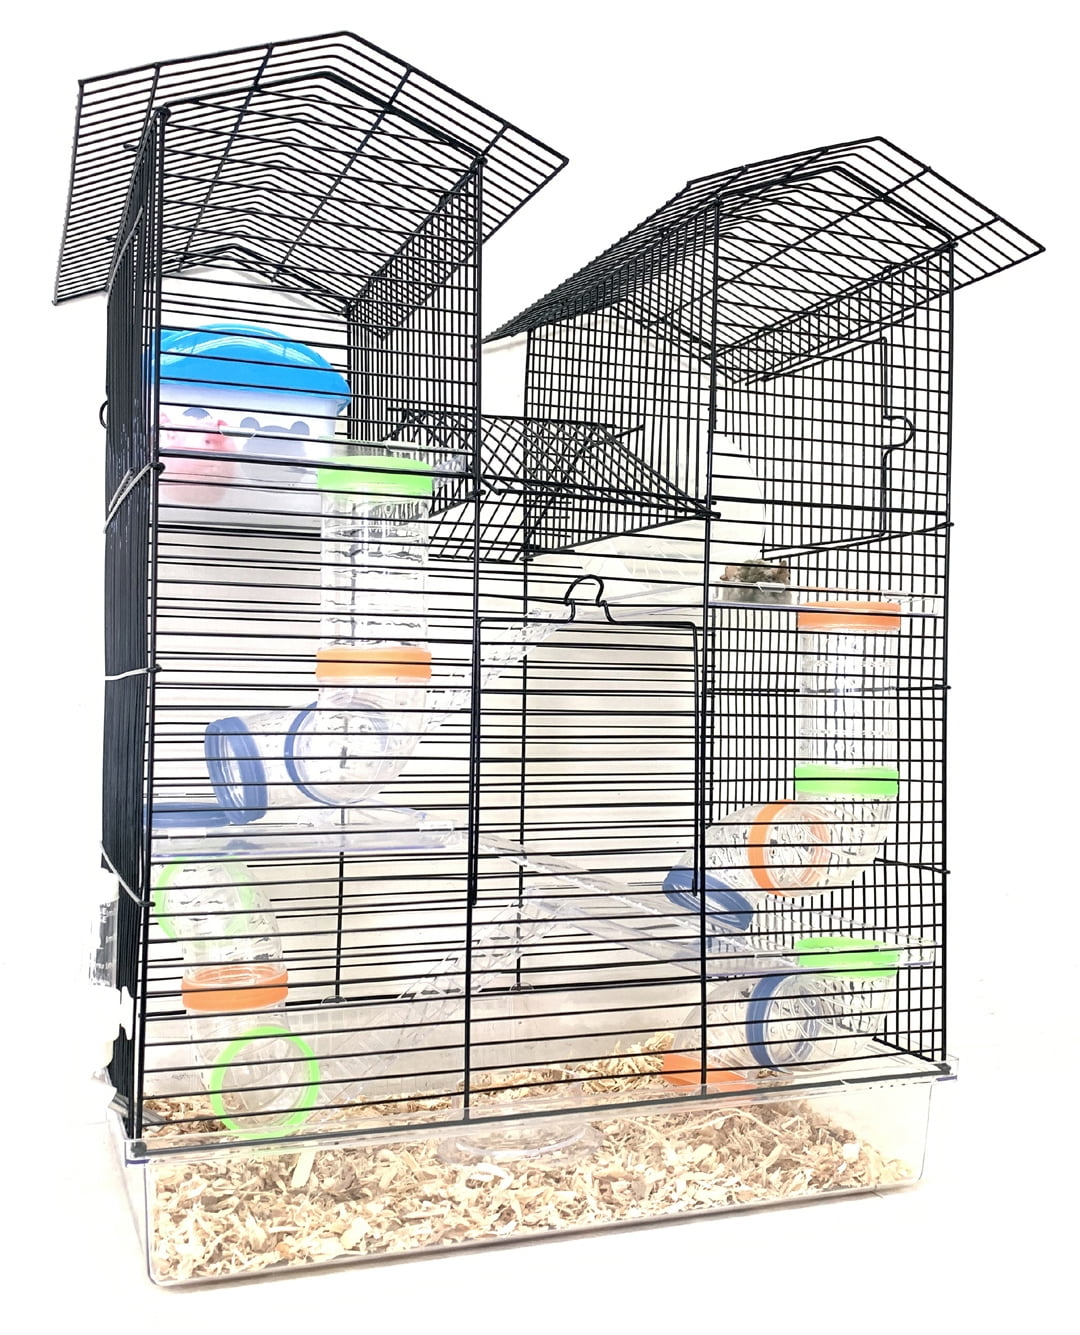 Large Twin Tower Habitat Hamster Home Rodent Gerbils House Mouse Mice Small Animal Critter Cage 